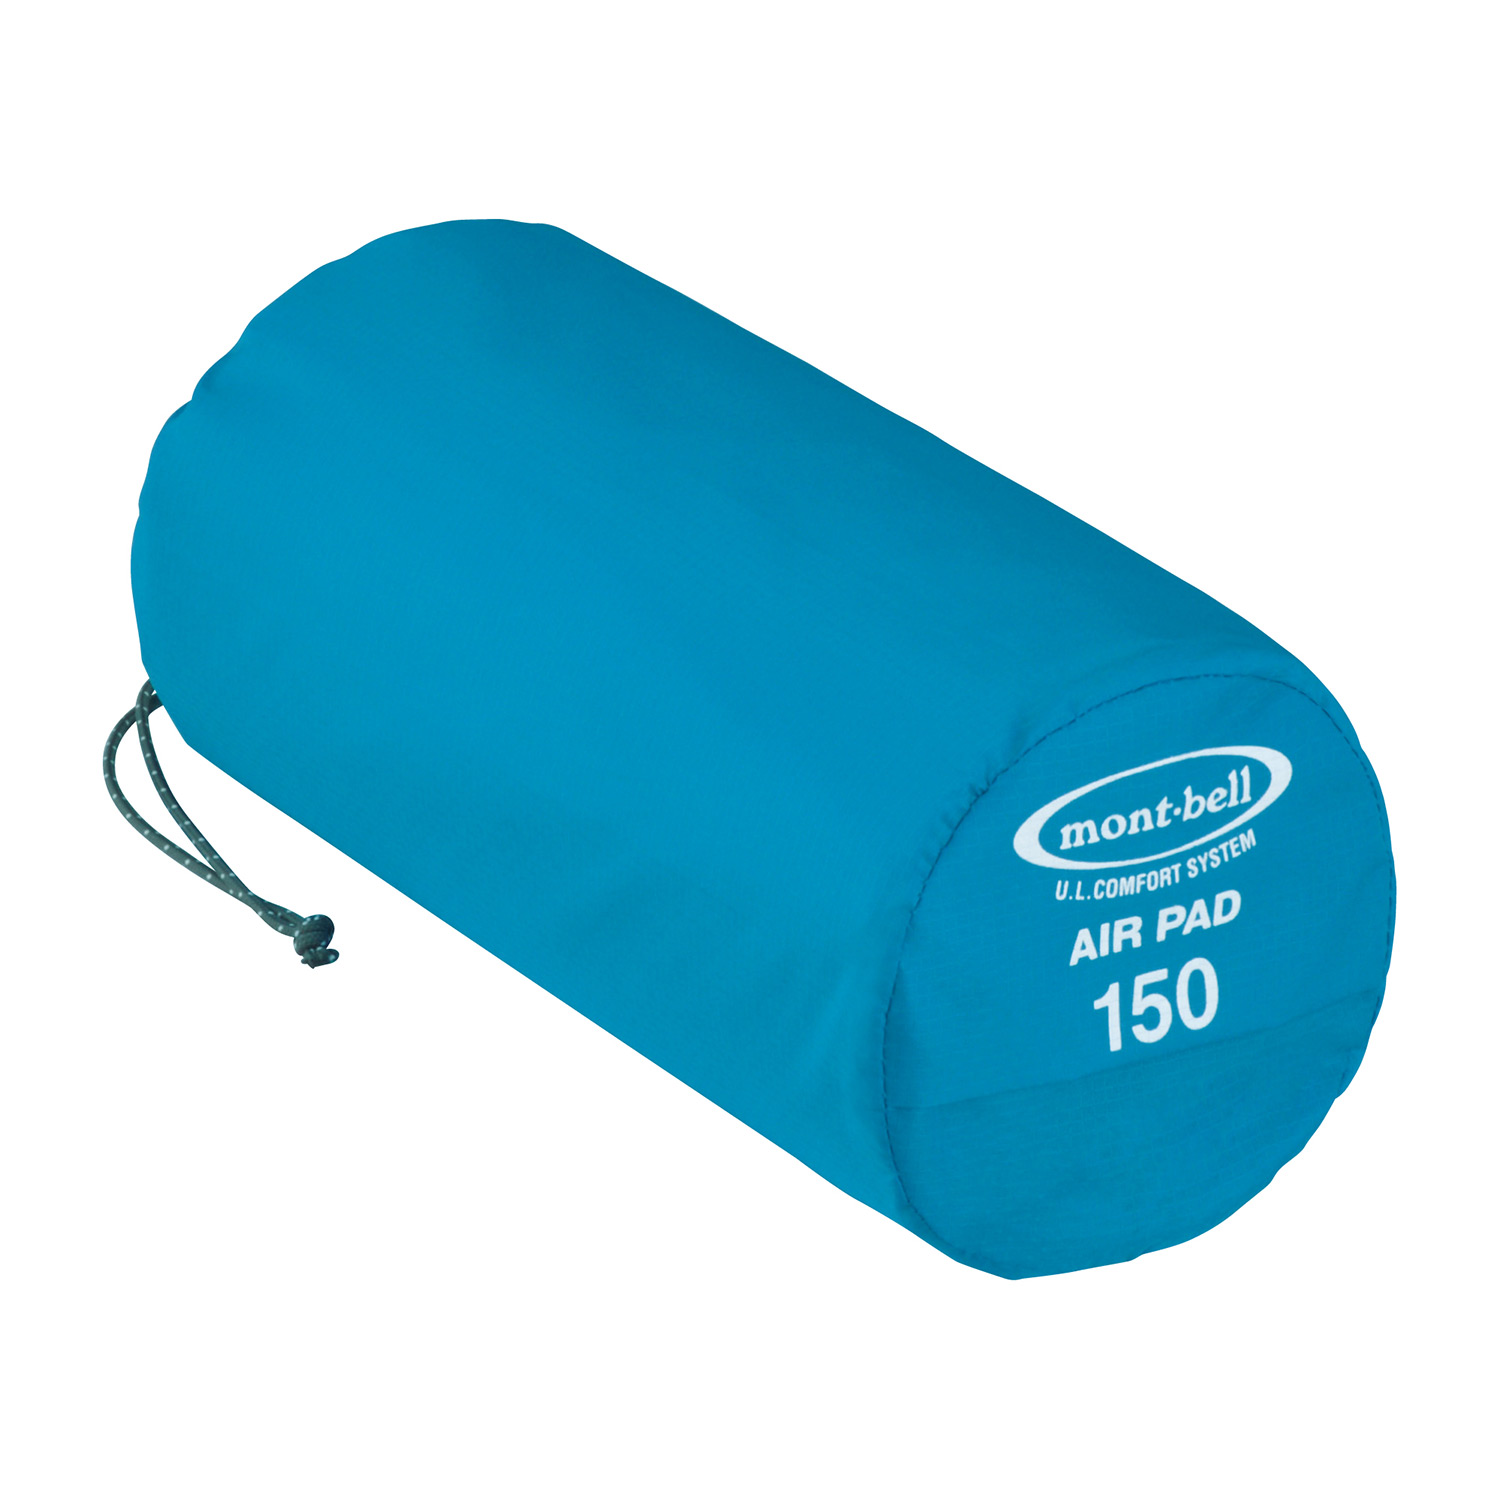 U.L. Comfort System Air Pad 150 | Montbell Euro